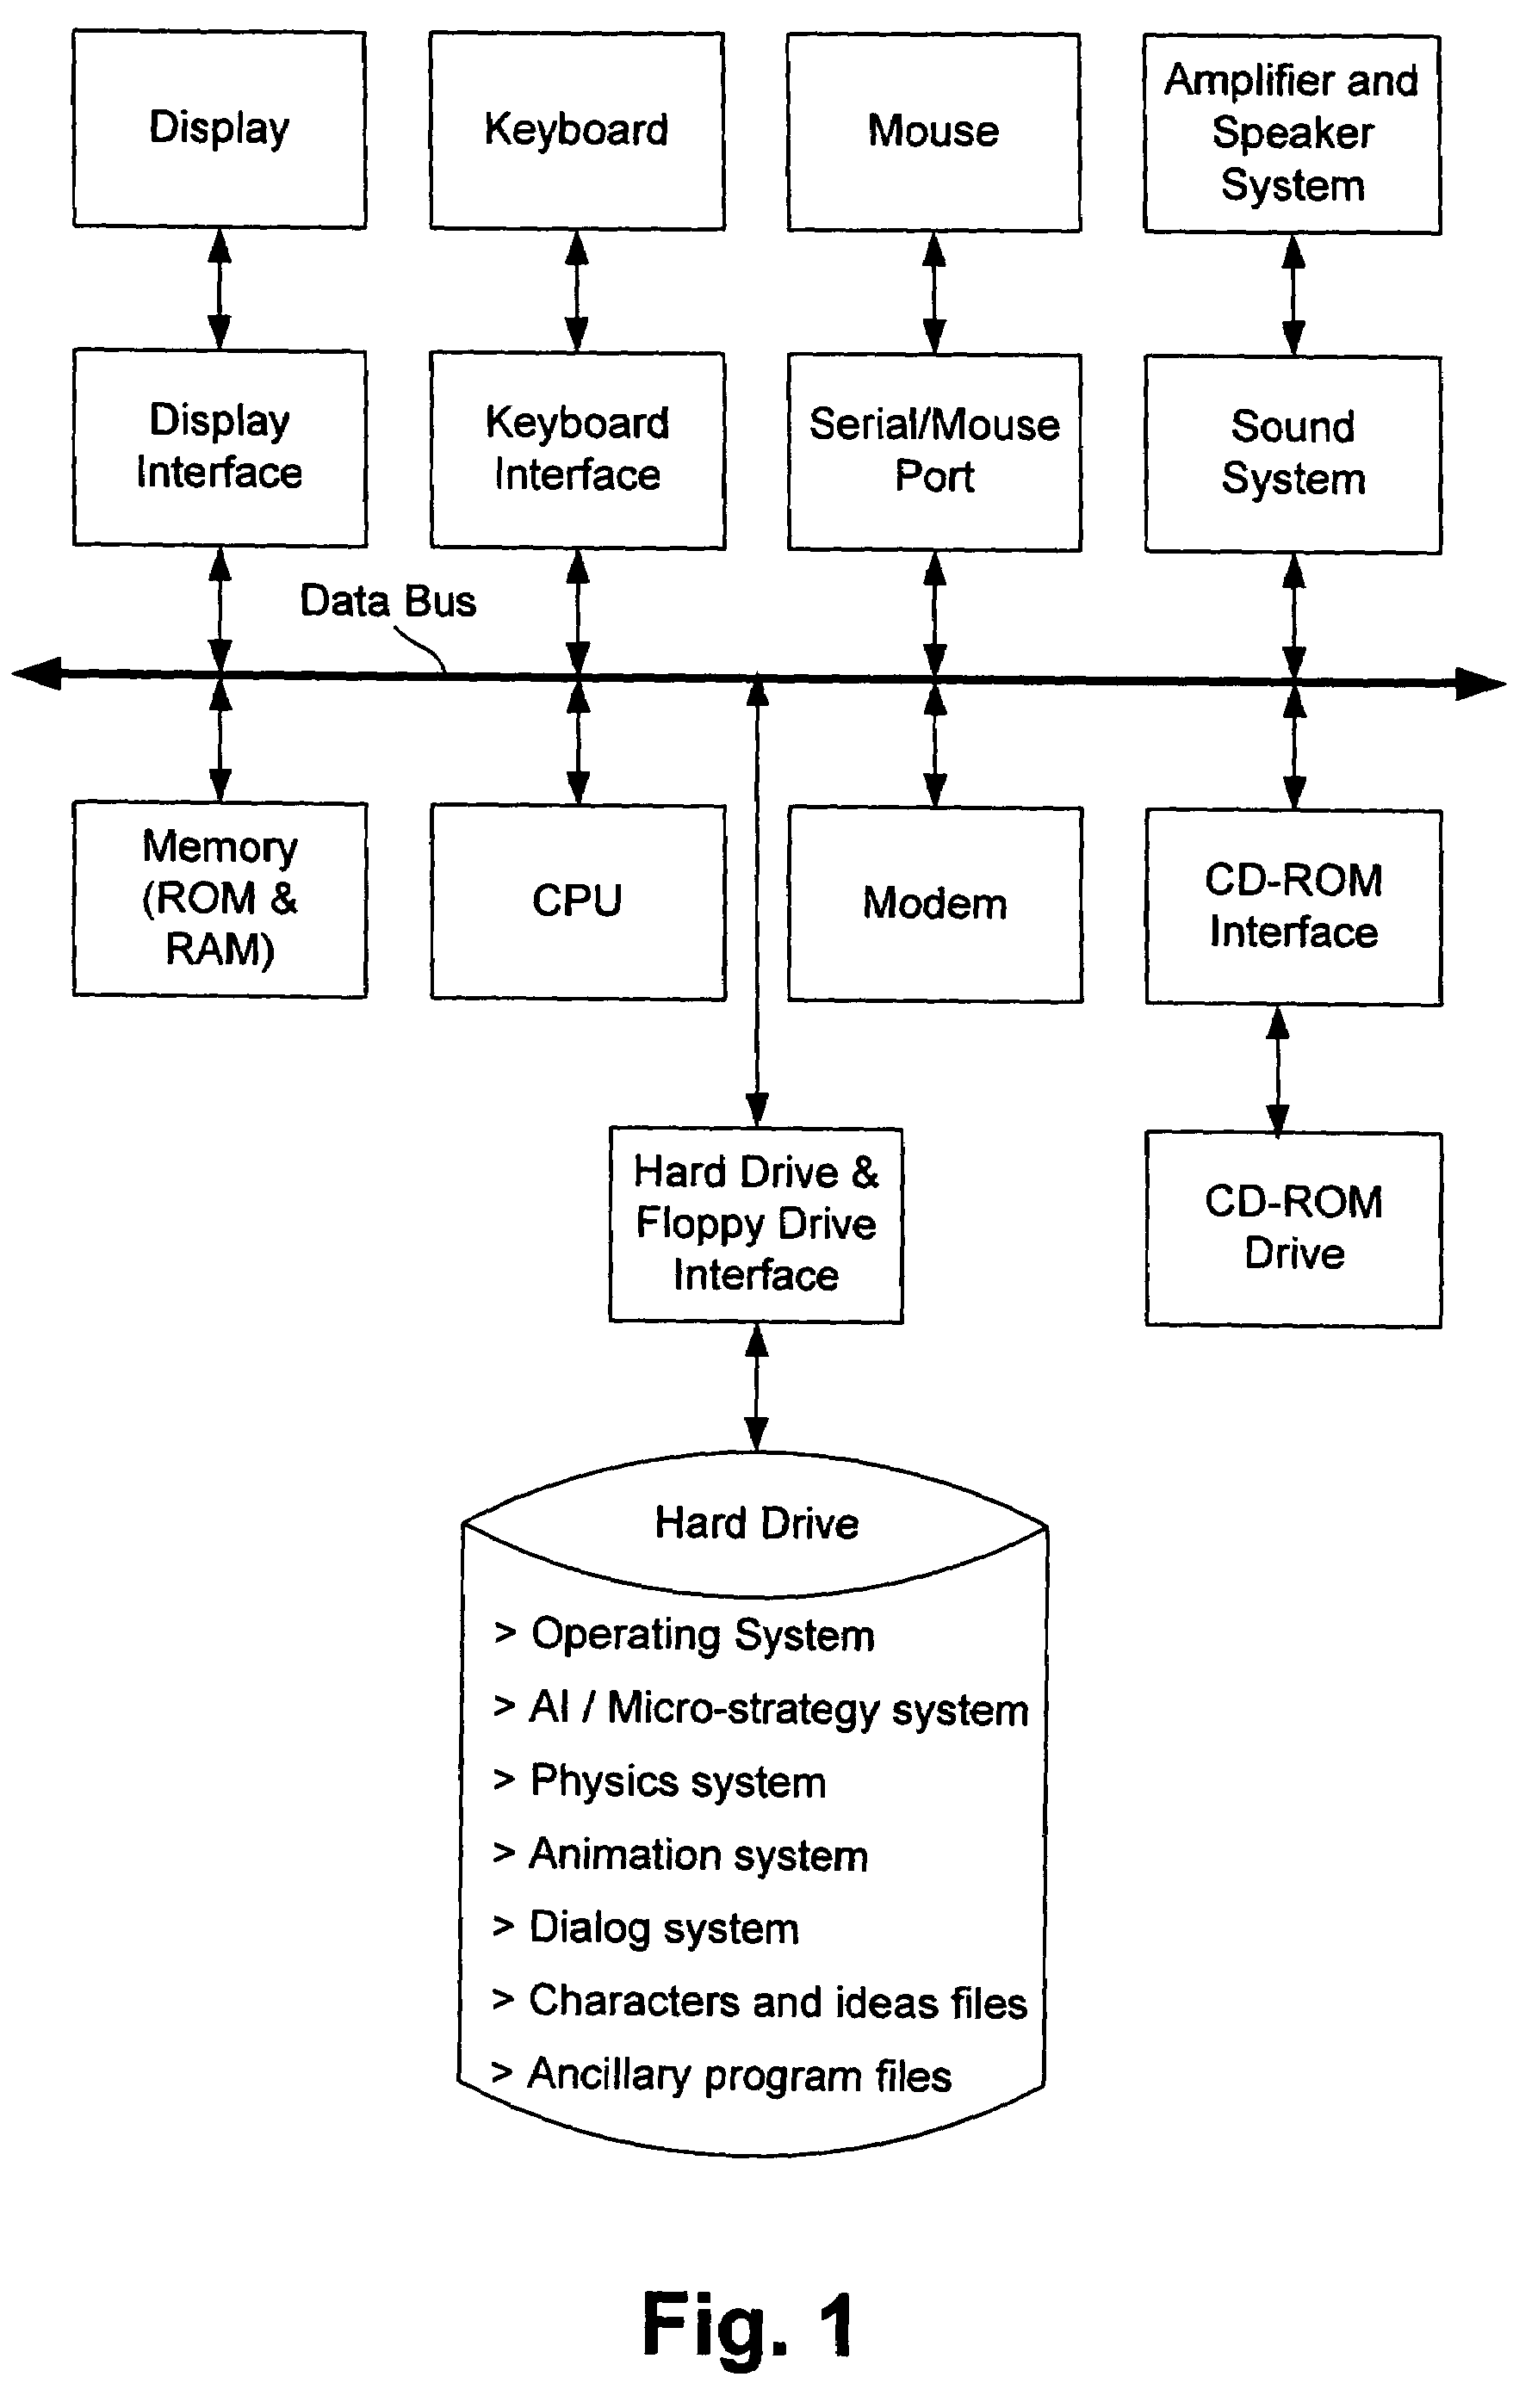 Computer-based learning system